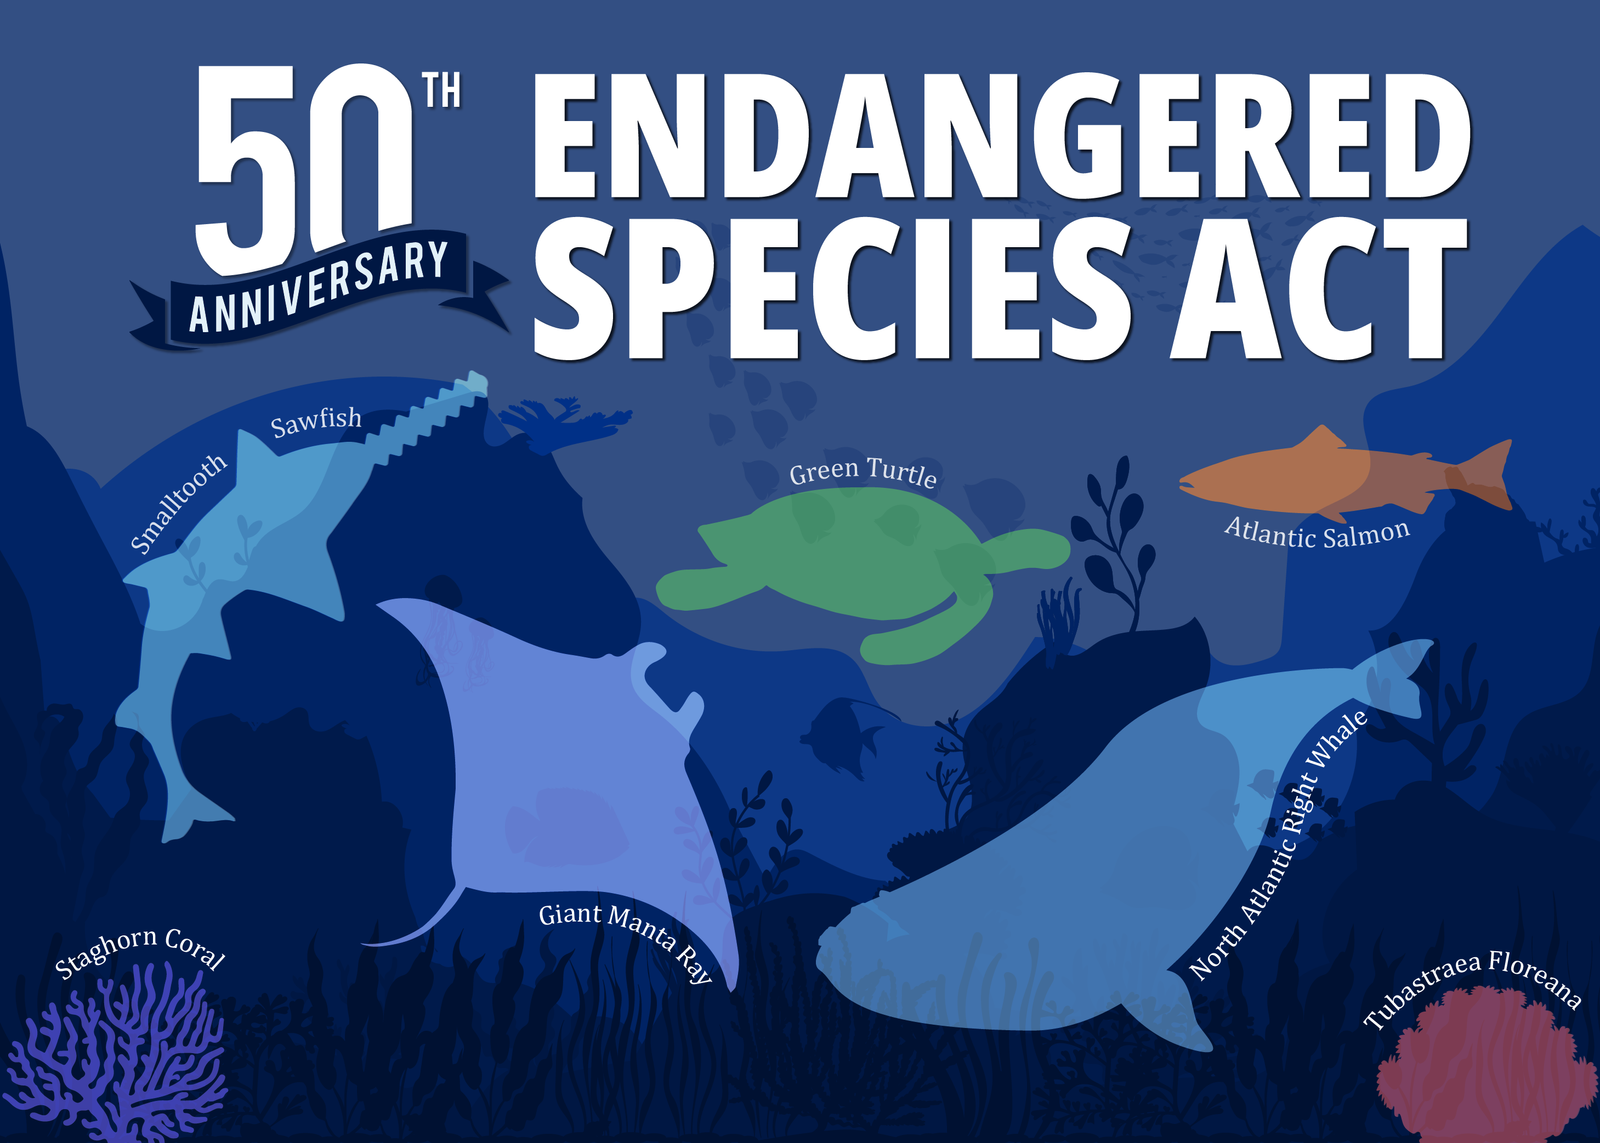 From Unity To Discord: 50 Years Of The Endangered Species Act